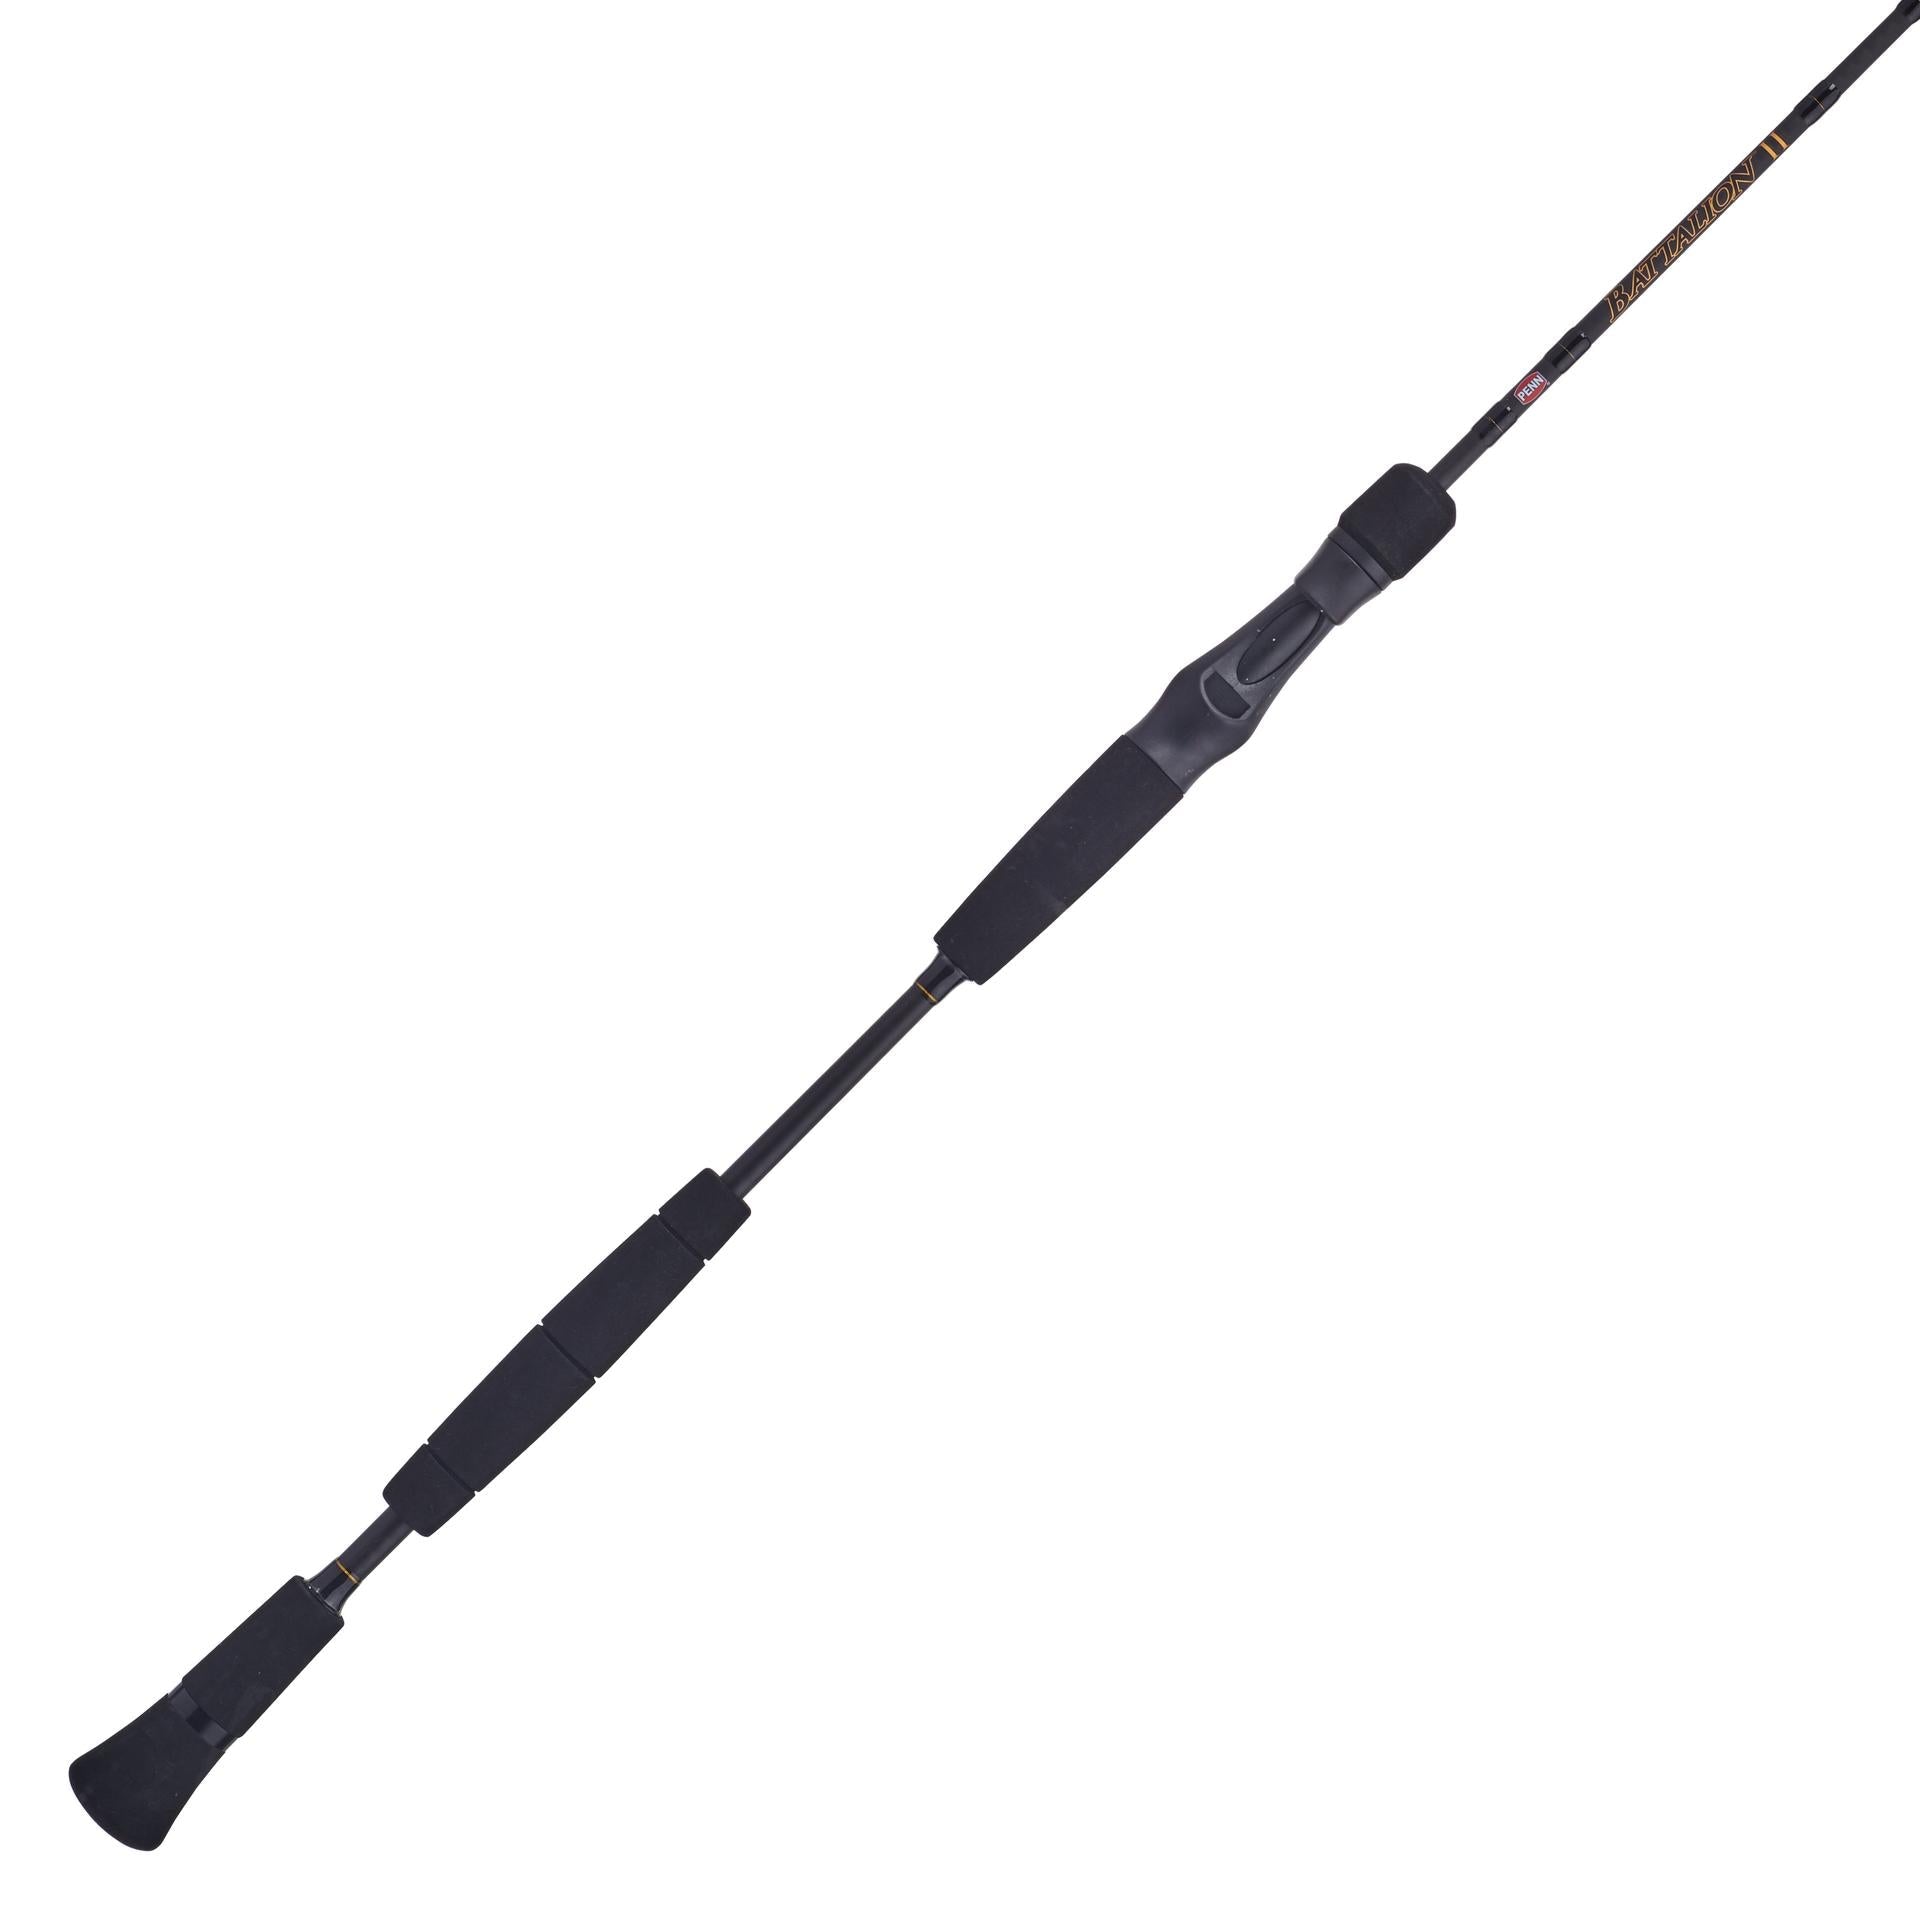 Tackle Test 2020: Best Baitcasting Rods & Reels - Game & Fish